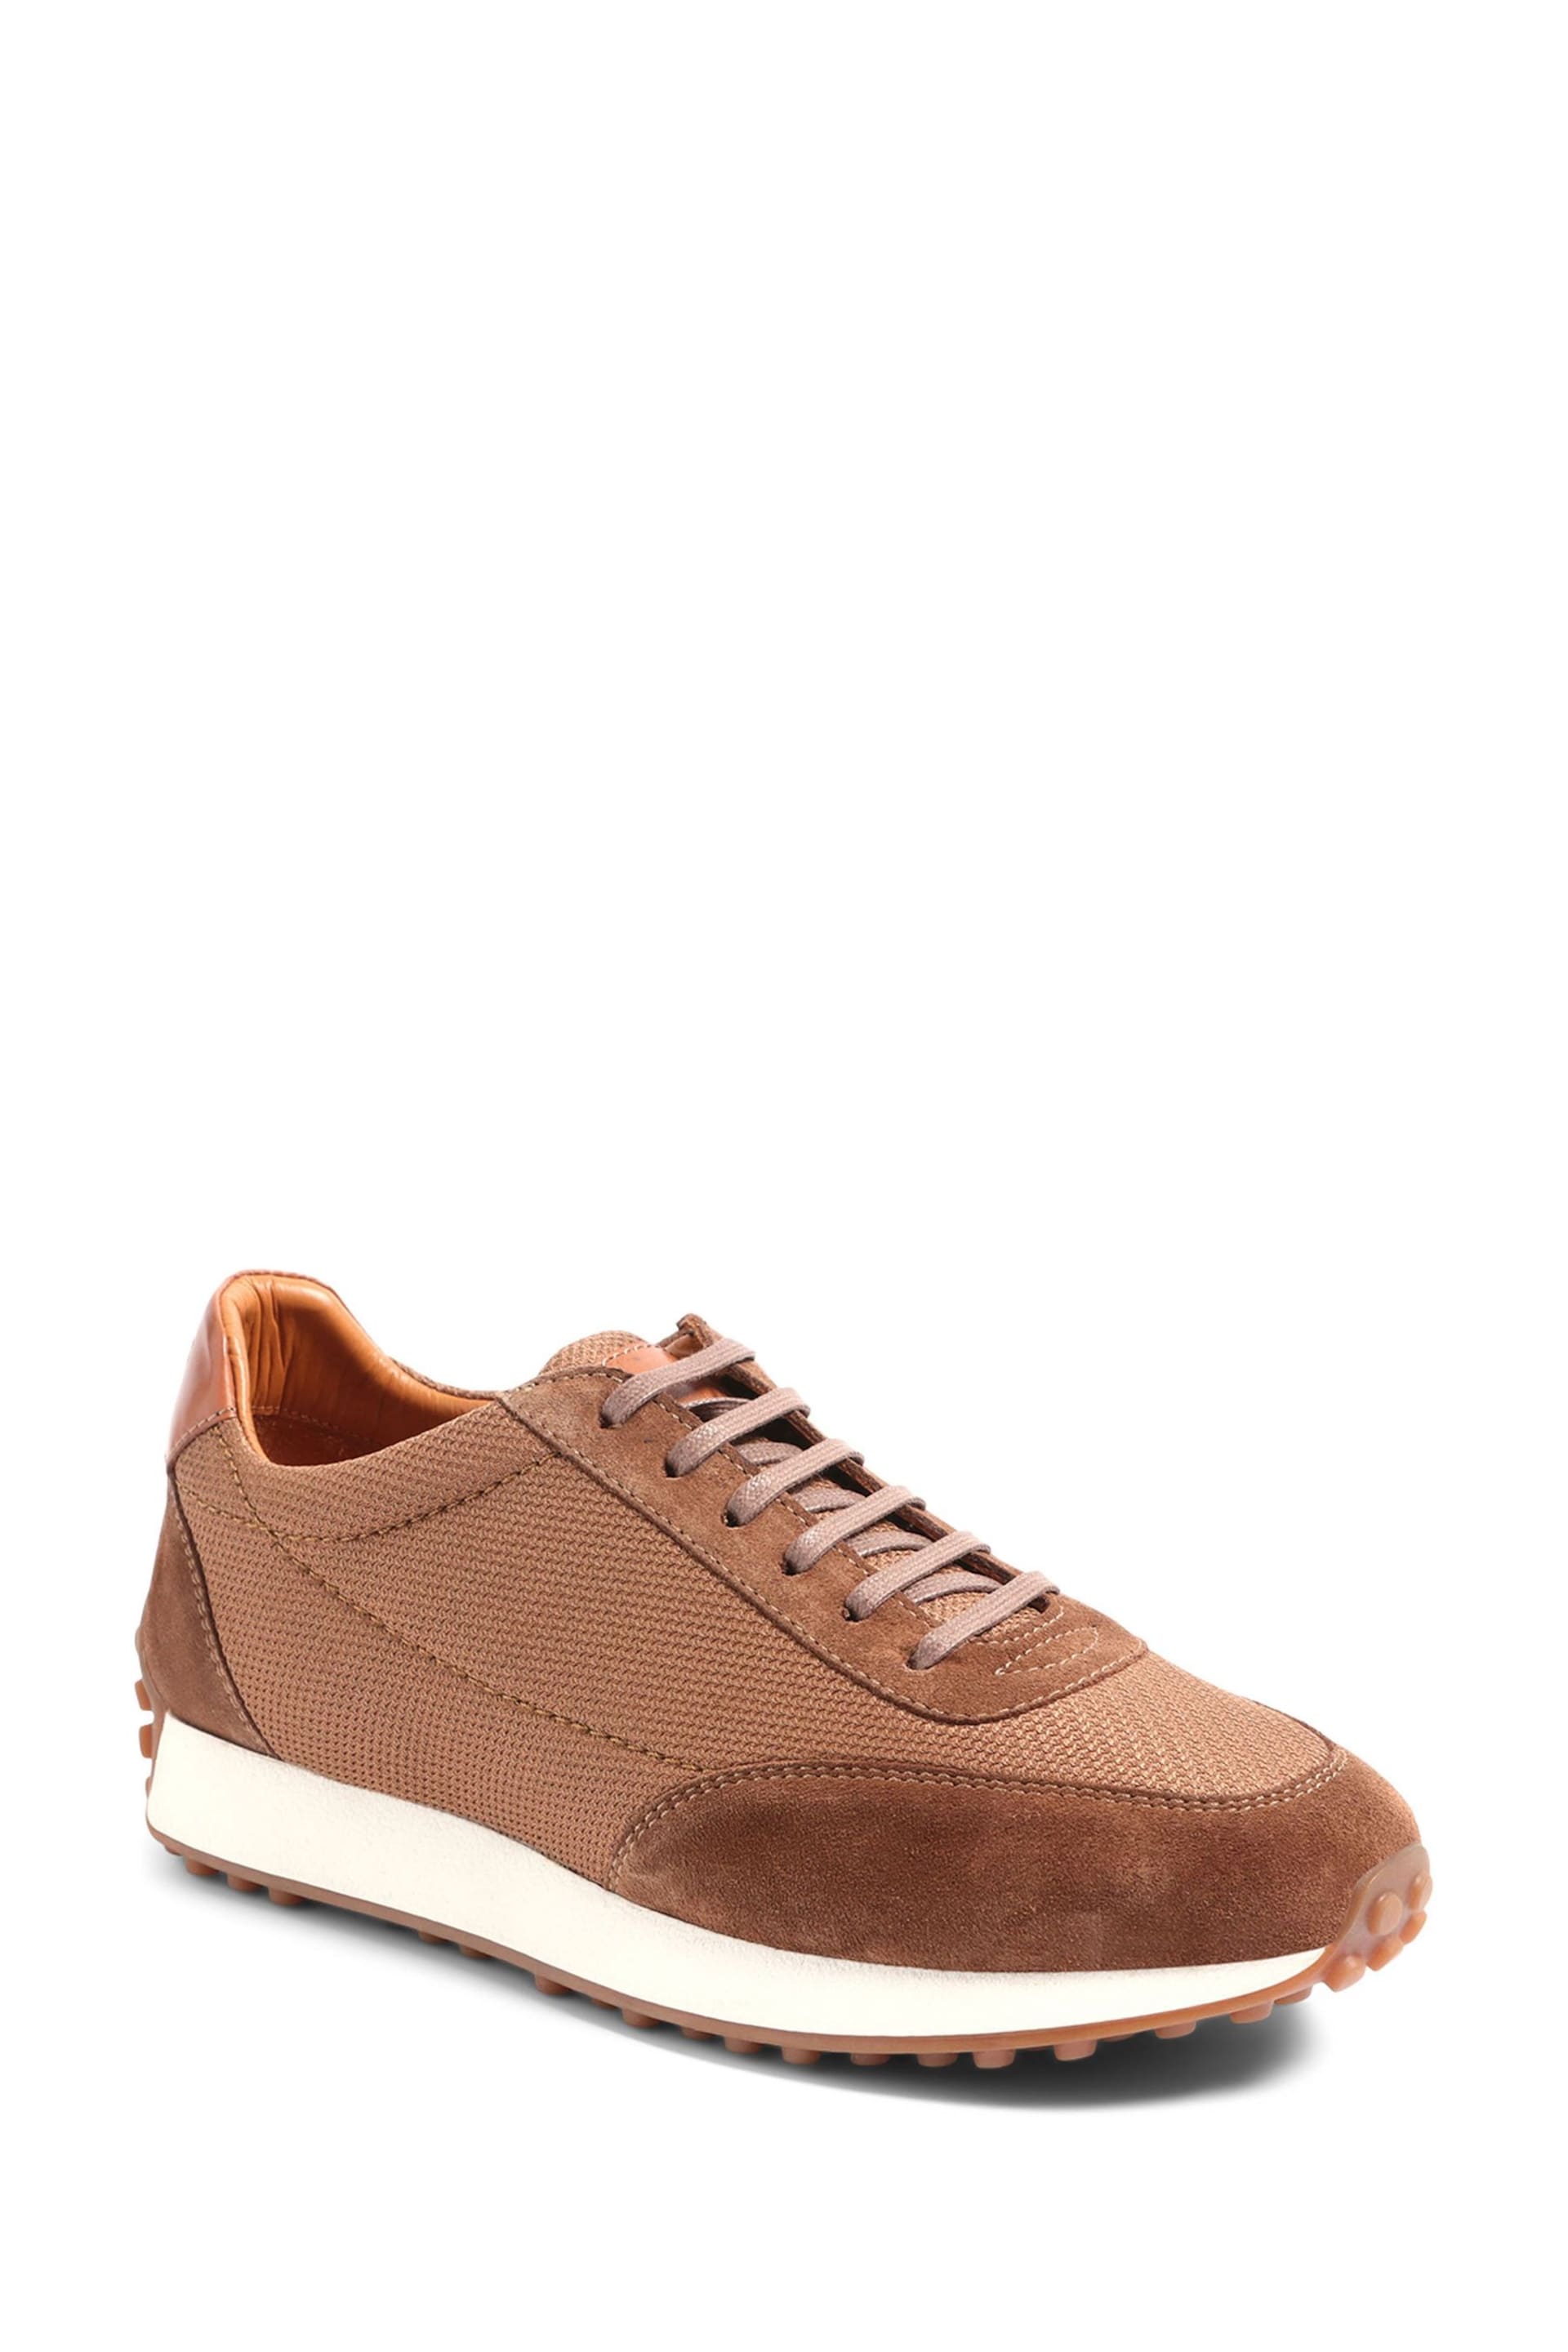 Jones Bootmaker Southend Smart Leather Trainers - Image 2 of 4